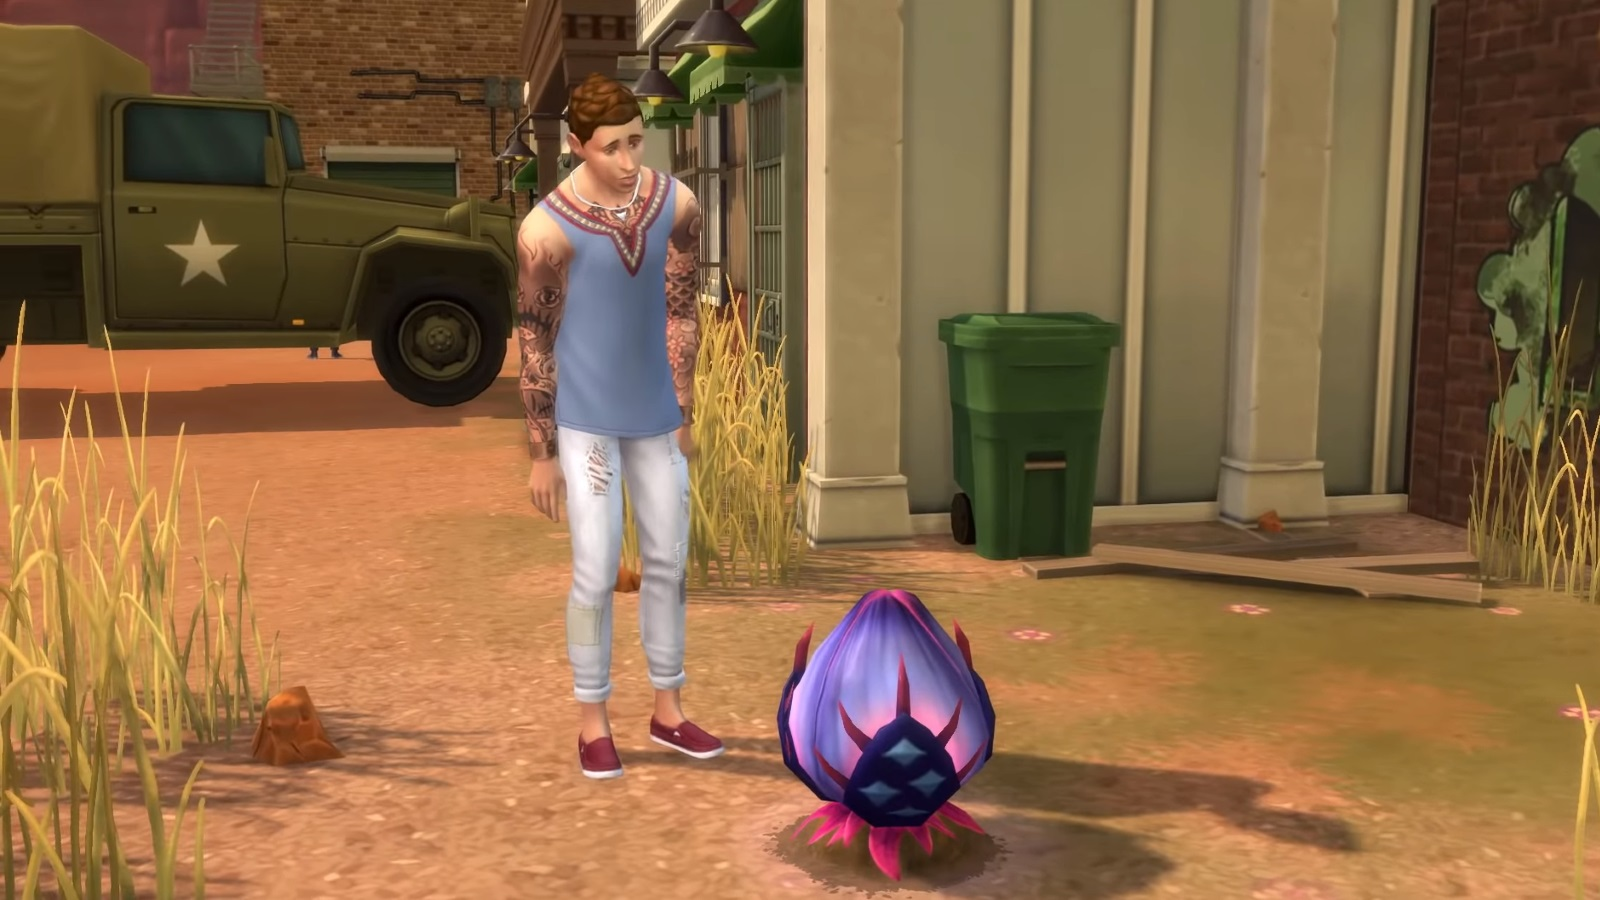 The Sims 4 StrangerVille Passo a Passo